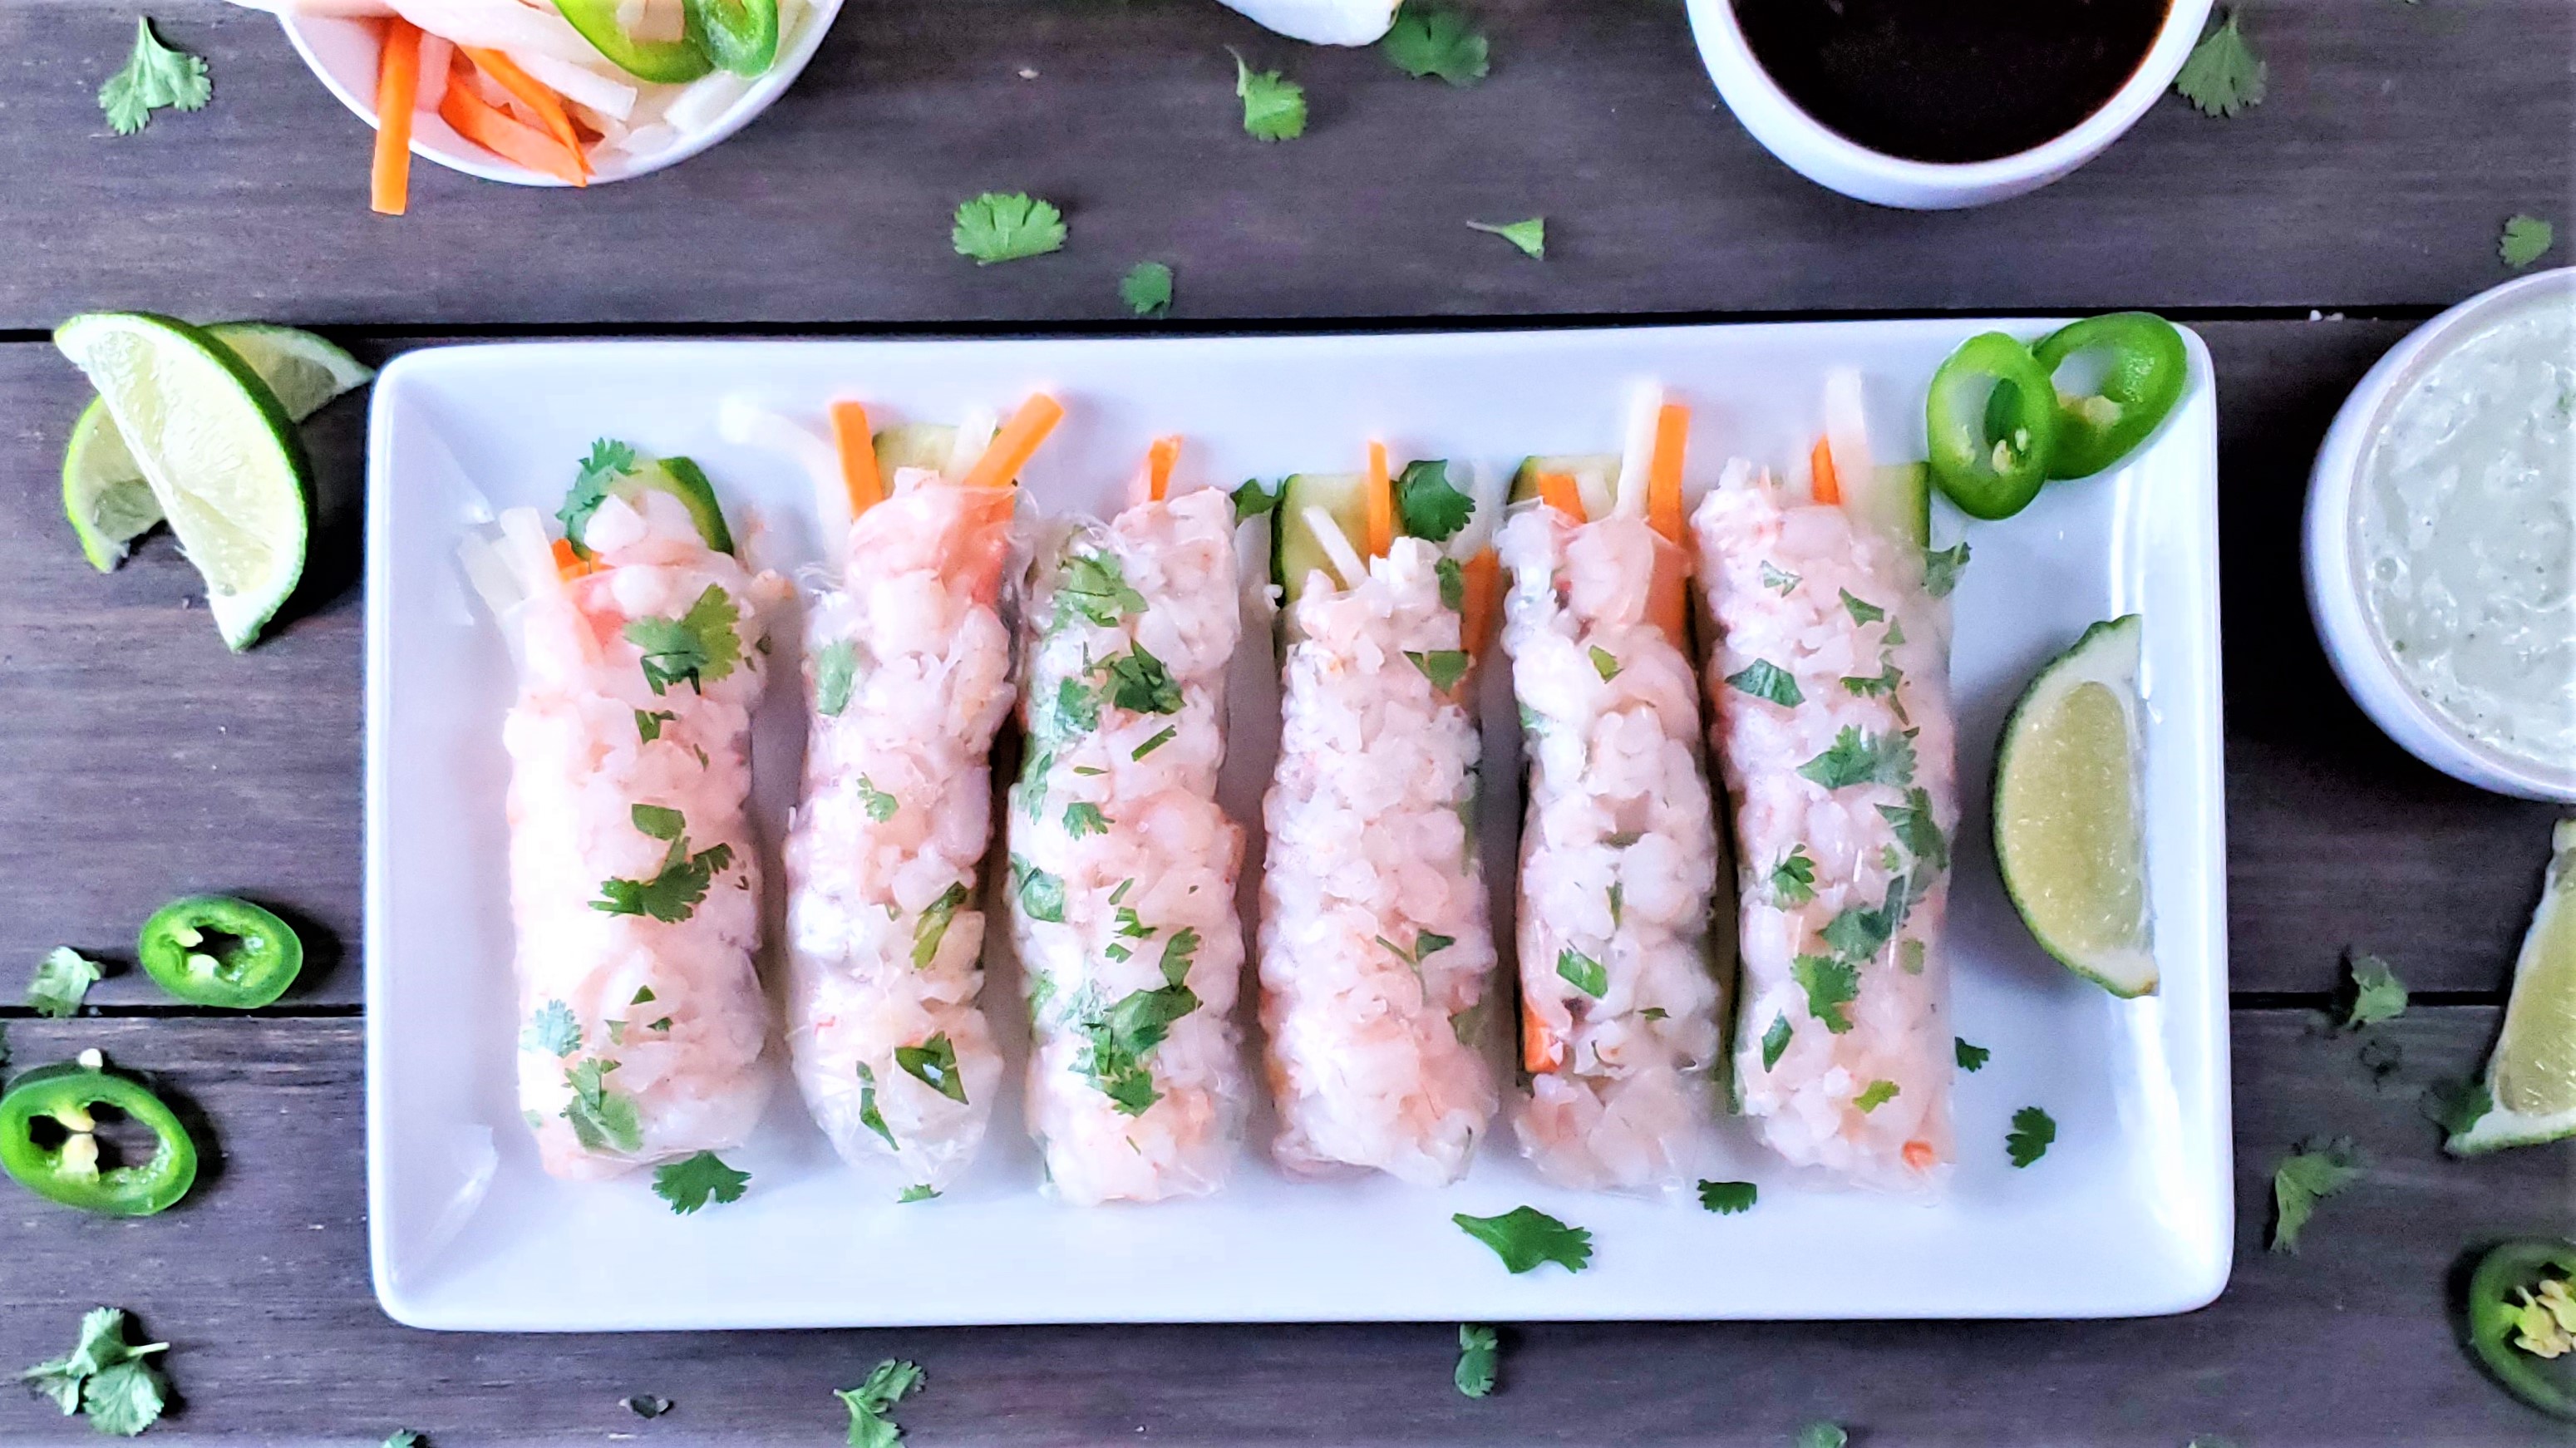 Shrimp Banh Mi Spring Rolls With Sweet Chili Hoisin Sauce | Delicious